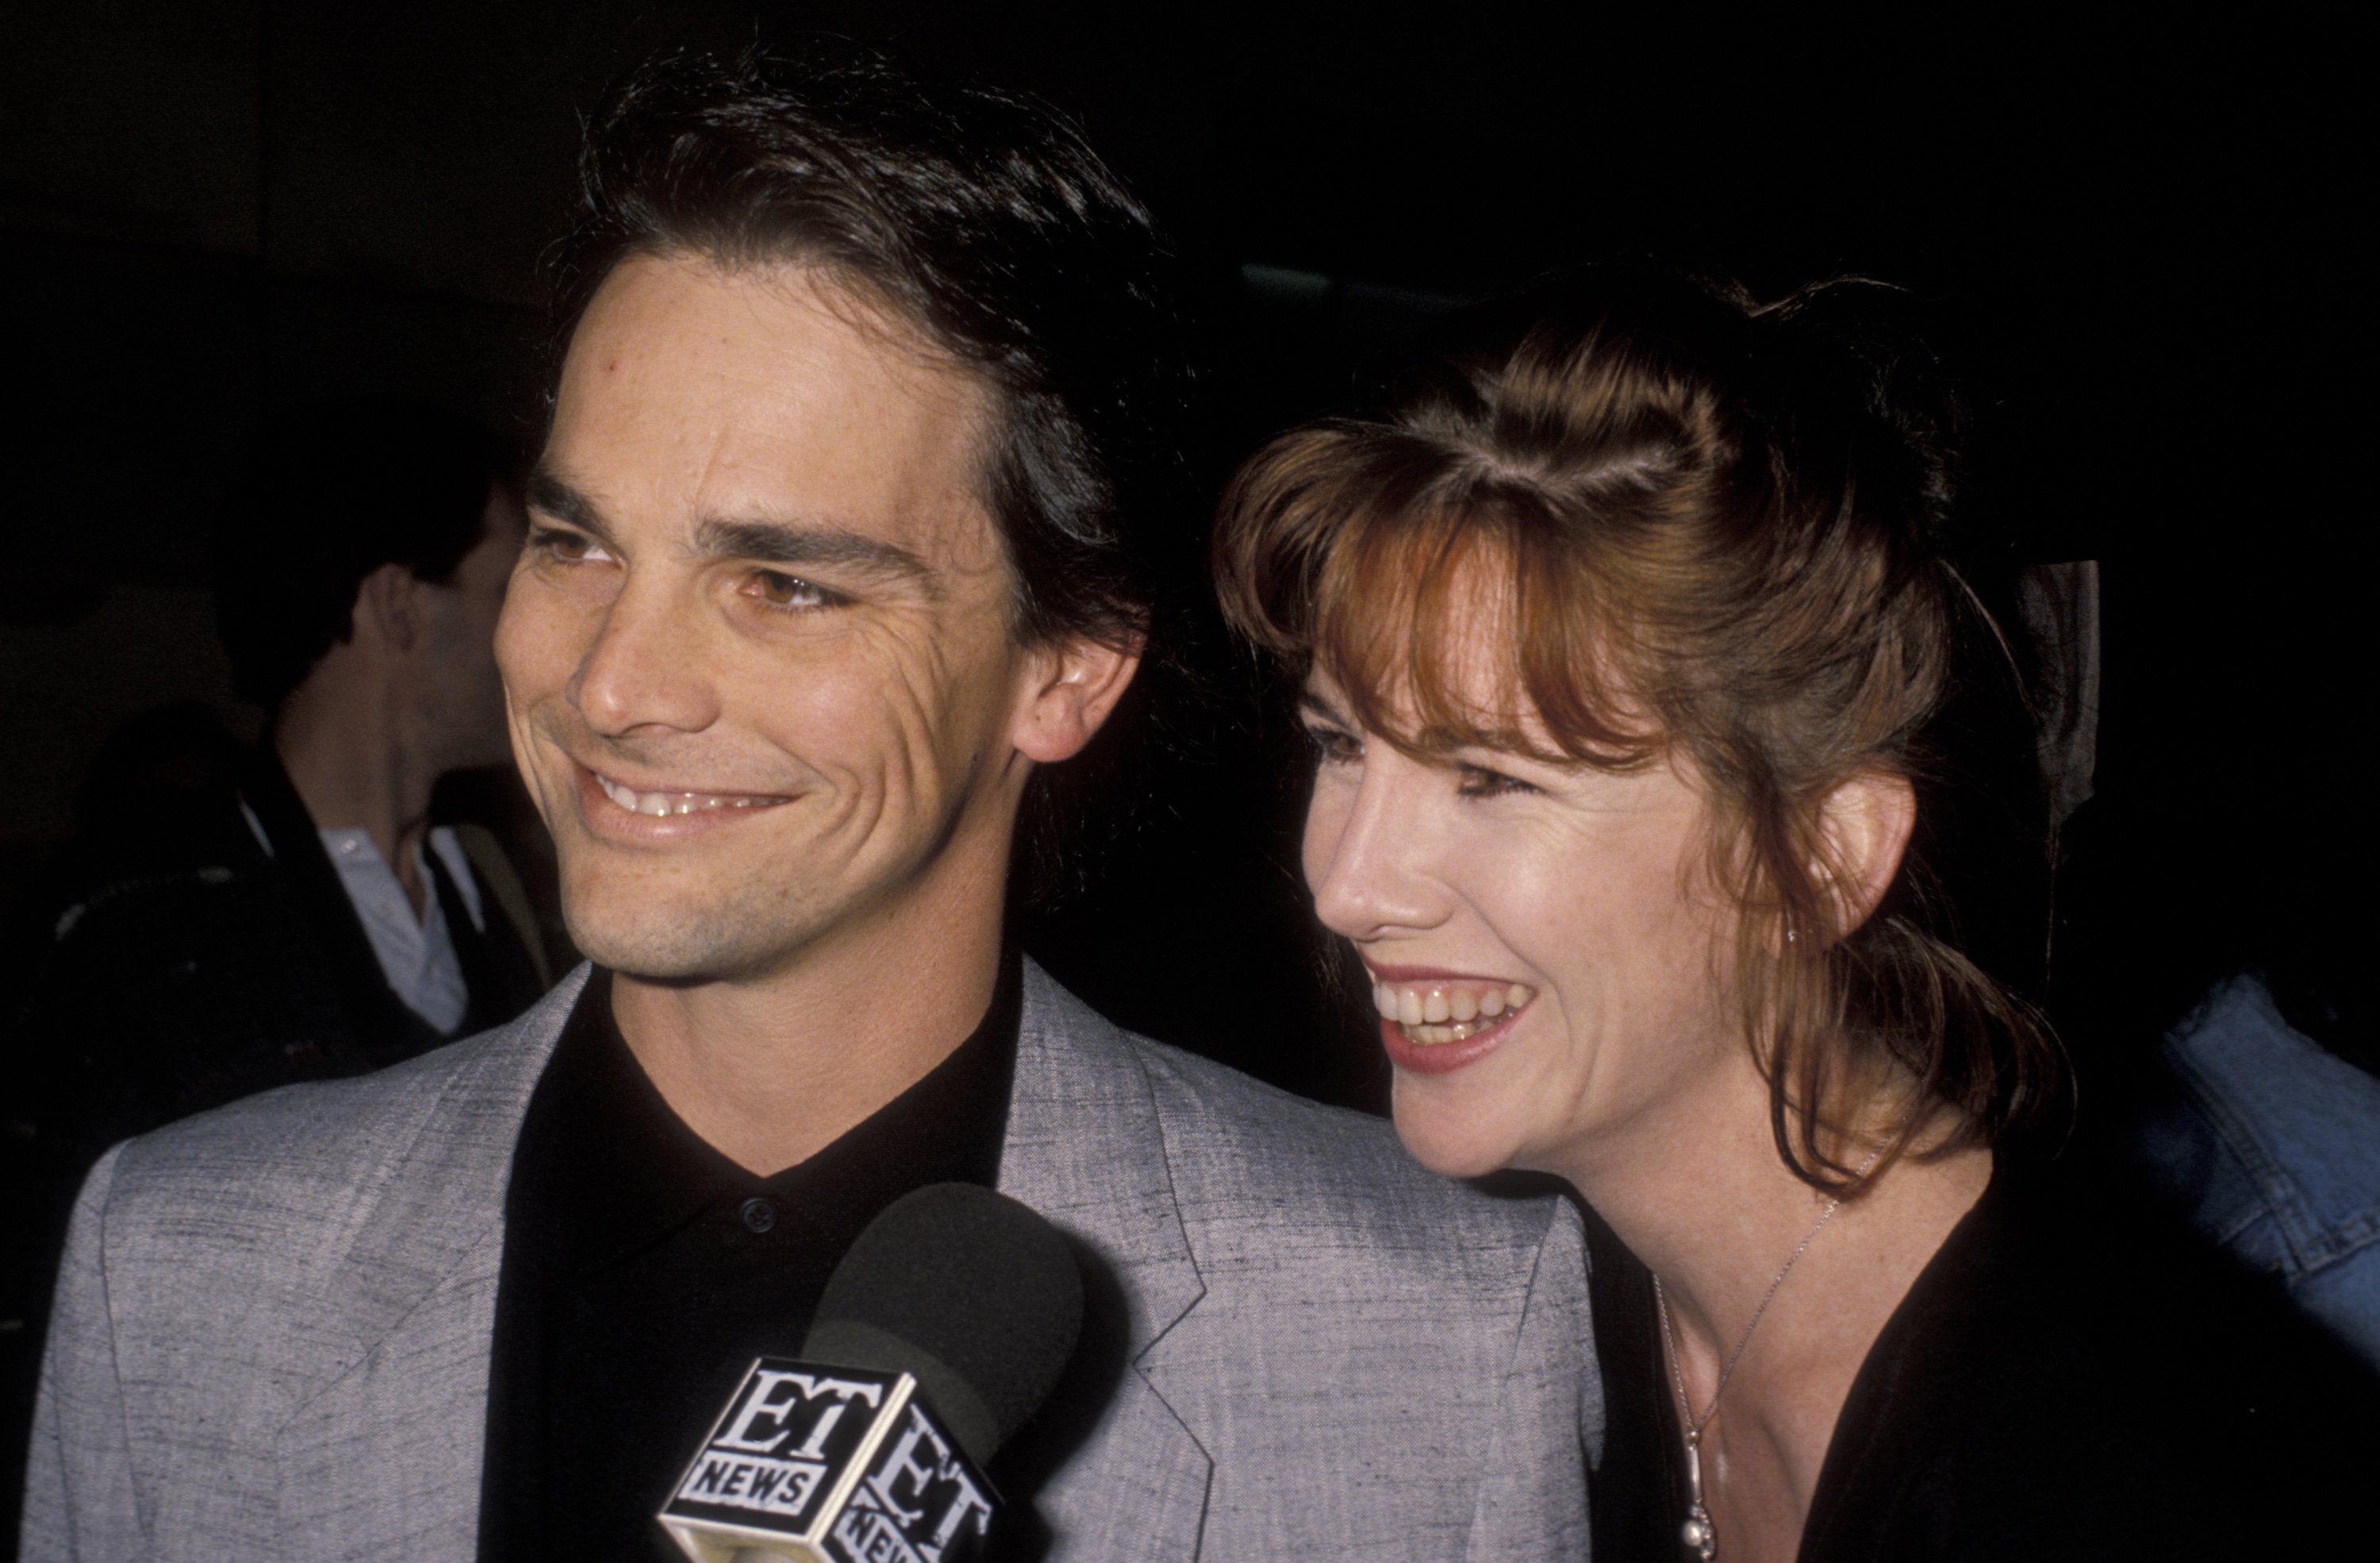 Bo Brinkman and Melissa Gilbert get interviewed by ET at the performance of "The Cocktail Hour" on April 19, 1990.